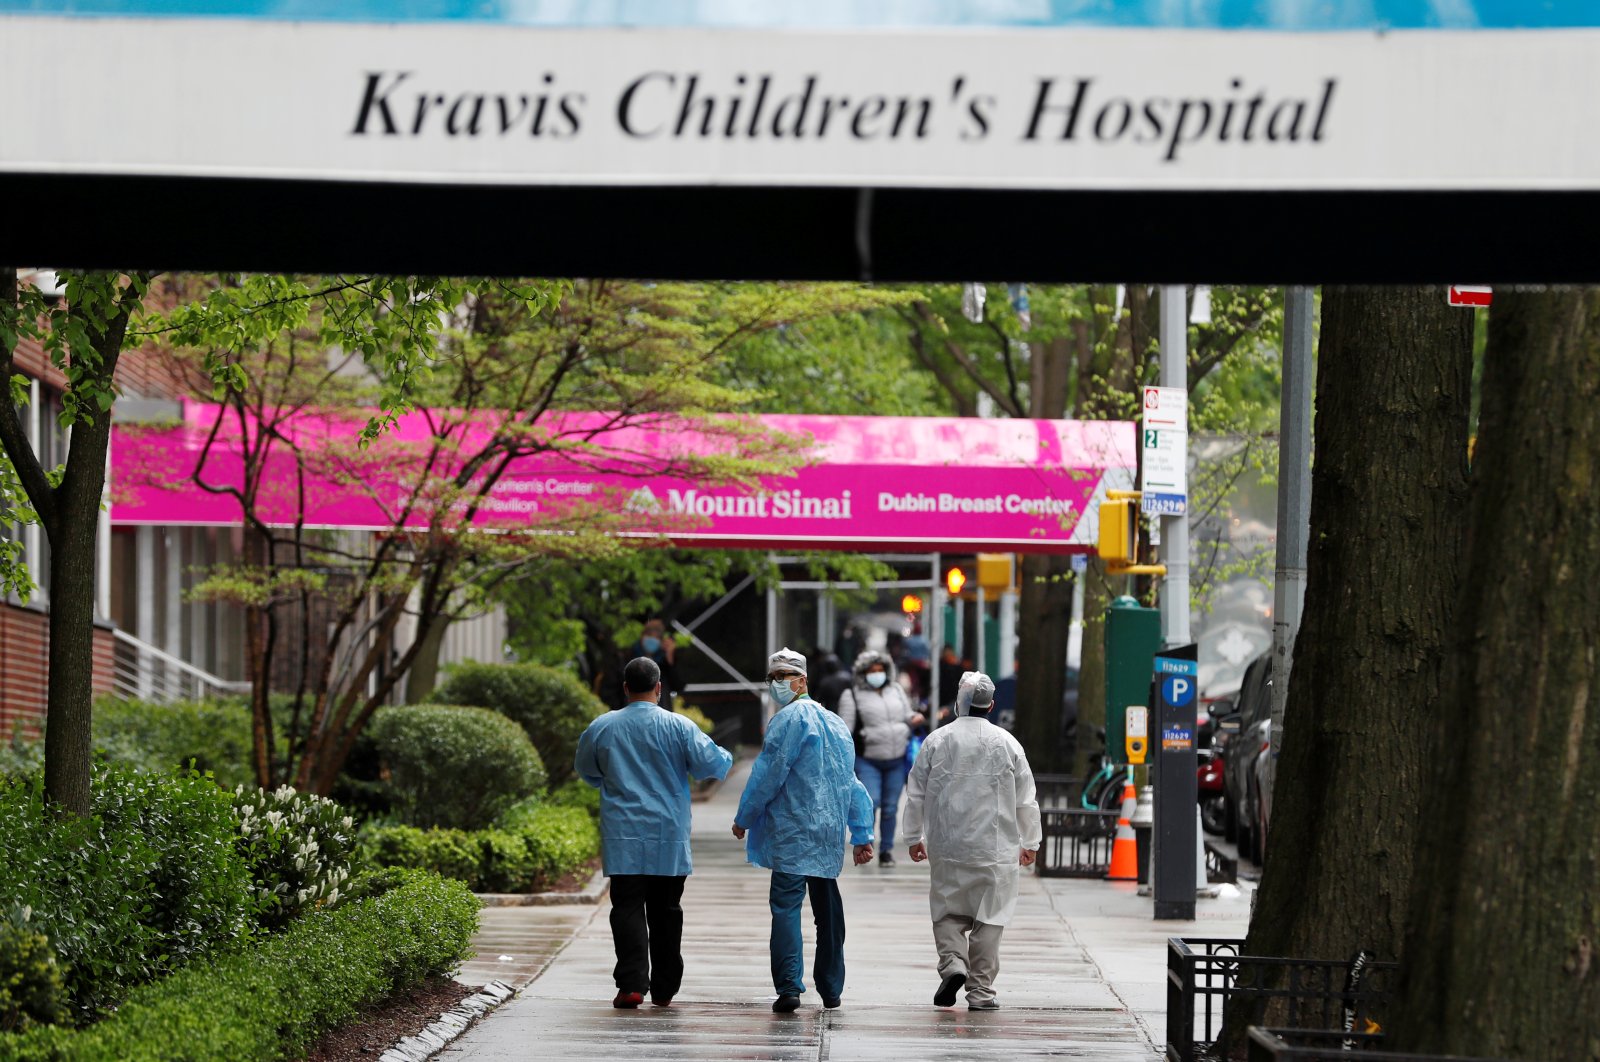 Healthcare workers stand near the entrance to the Mount Sinai Kravis Children's Hospital as the outbreak of the coronavirus disease continues in the Manhattan borough of New York U.S., May 8, 2020. (Reuters Photo)